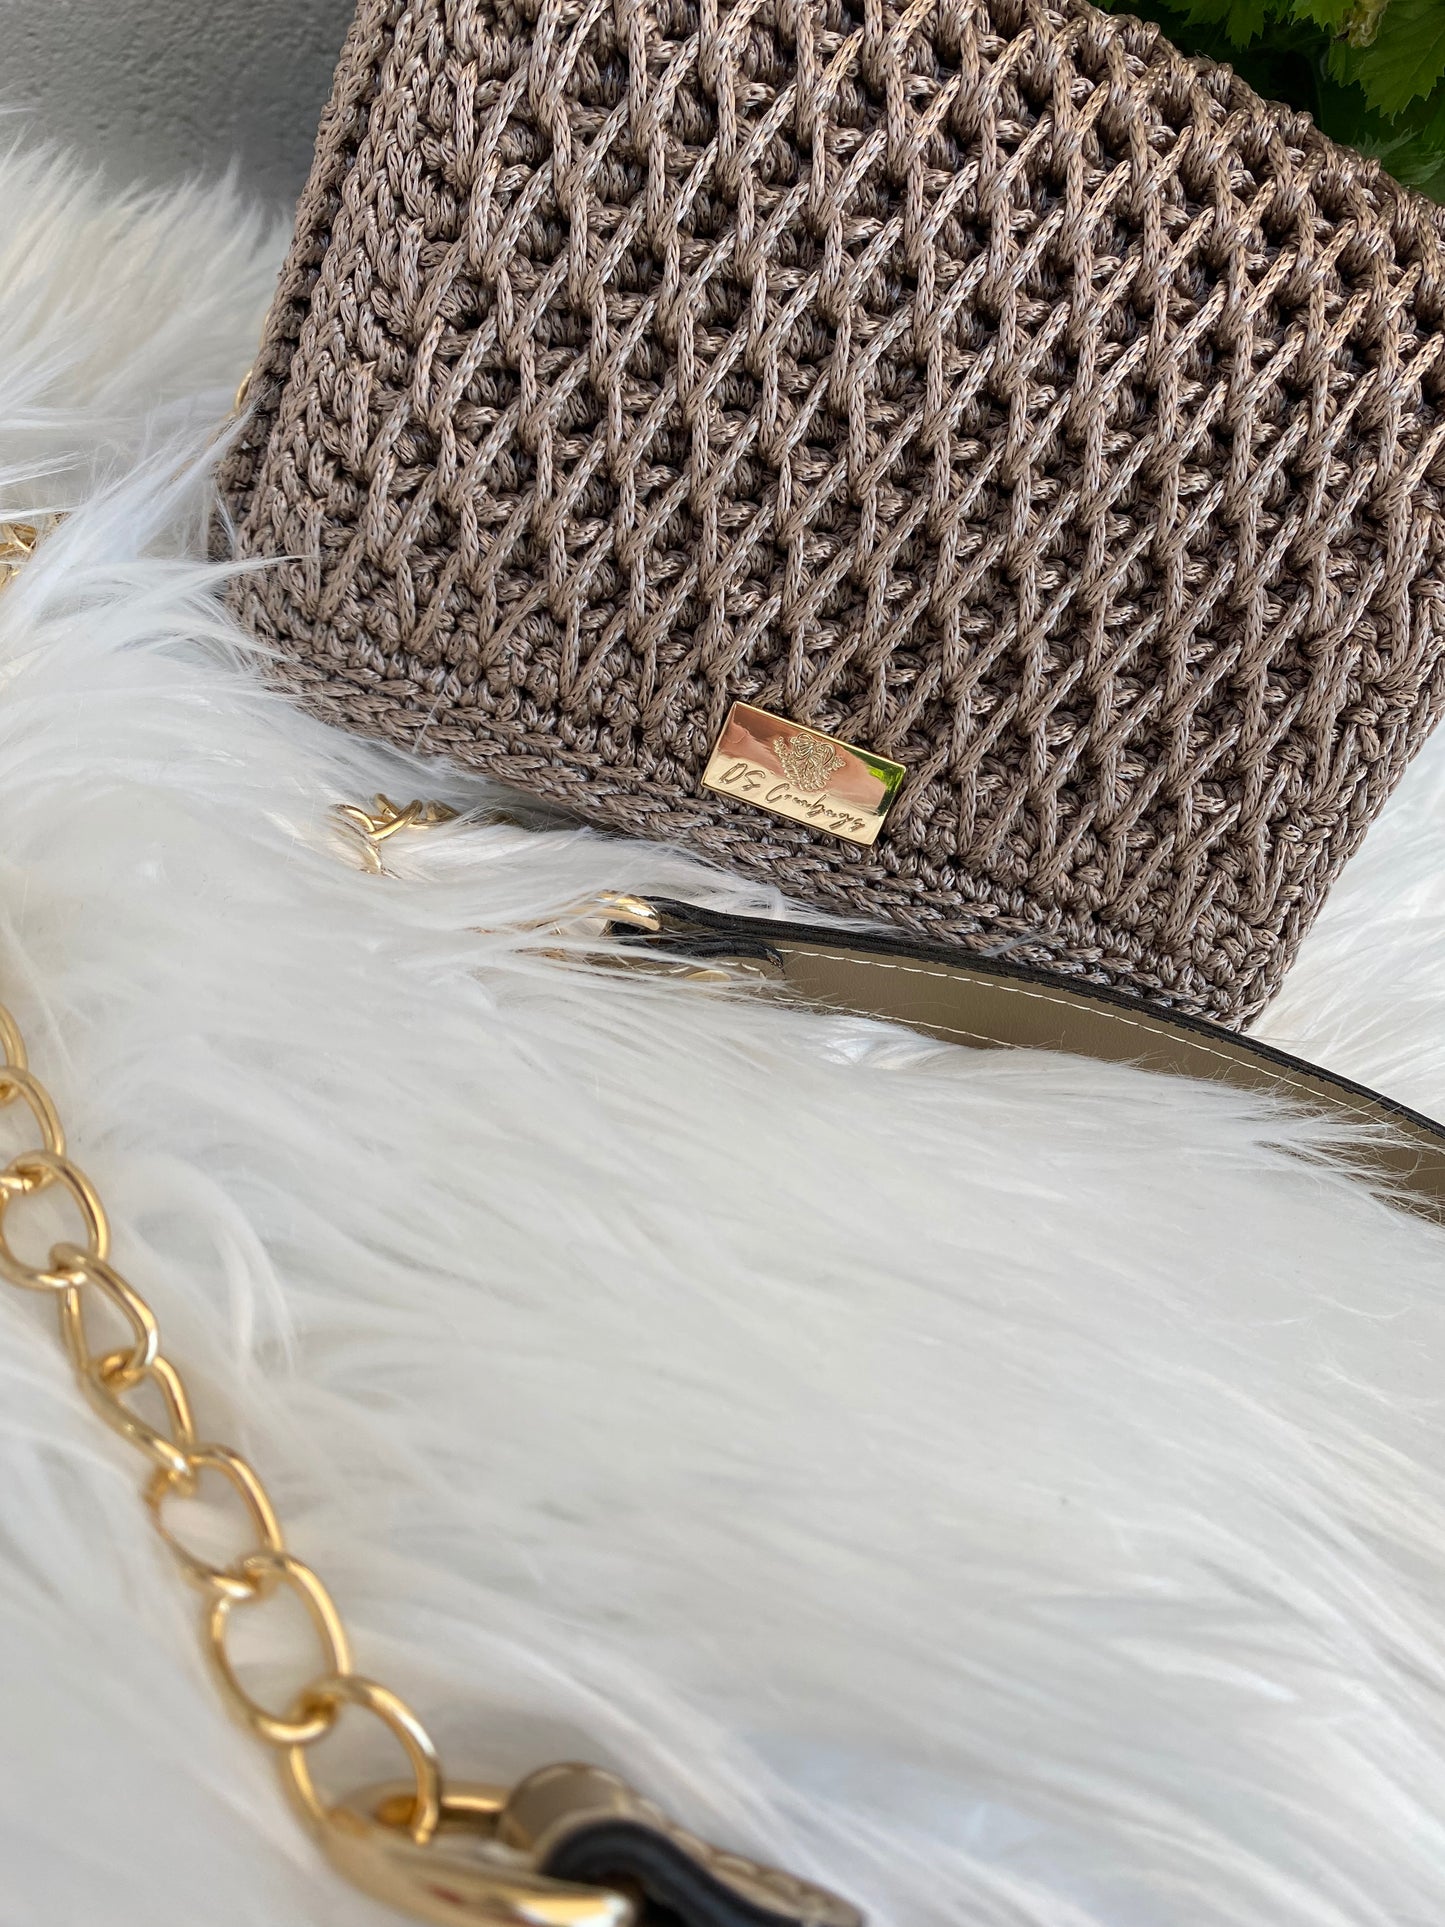 Chic mini handbag with Eco leather and golden chain combination